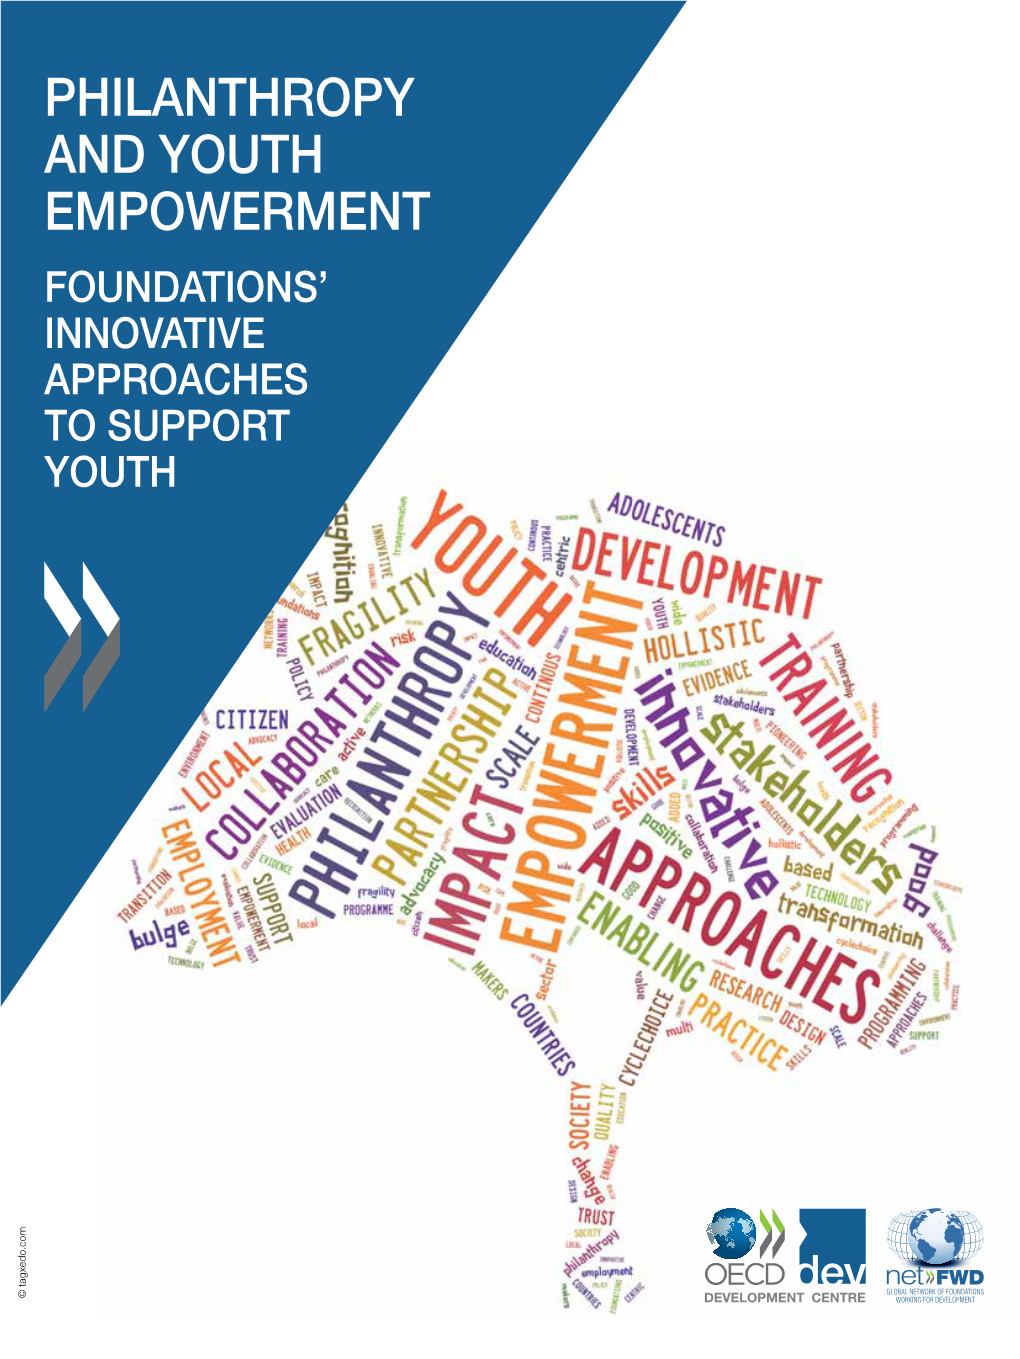 Philanthropy and Youth Empowerment